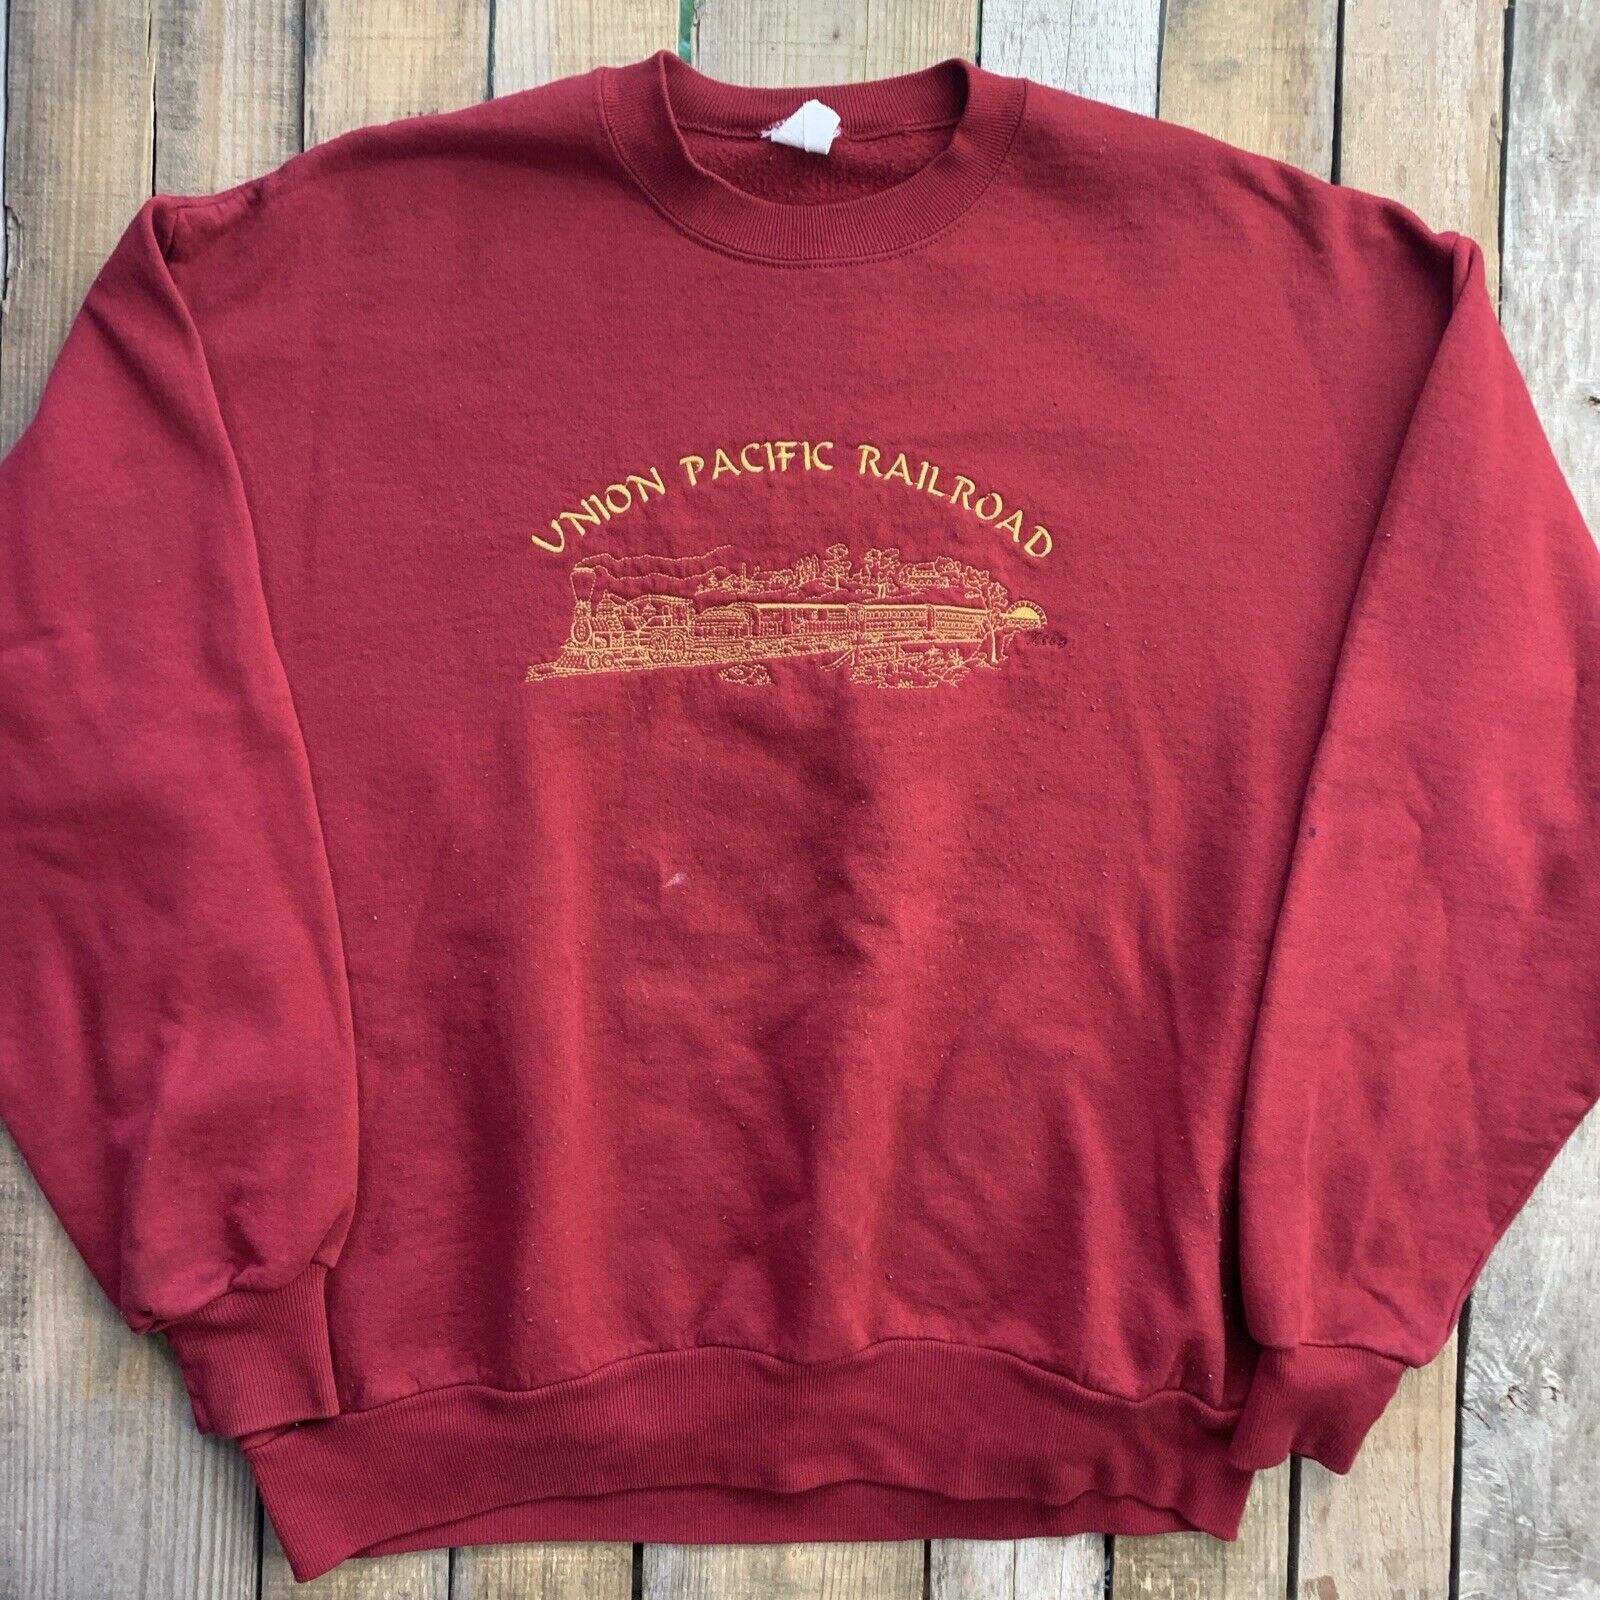 Union Pacific Railroad Embroidered VTG Sweat Shirt Mens Size L Red